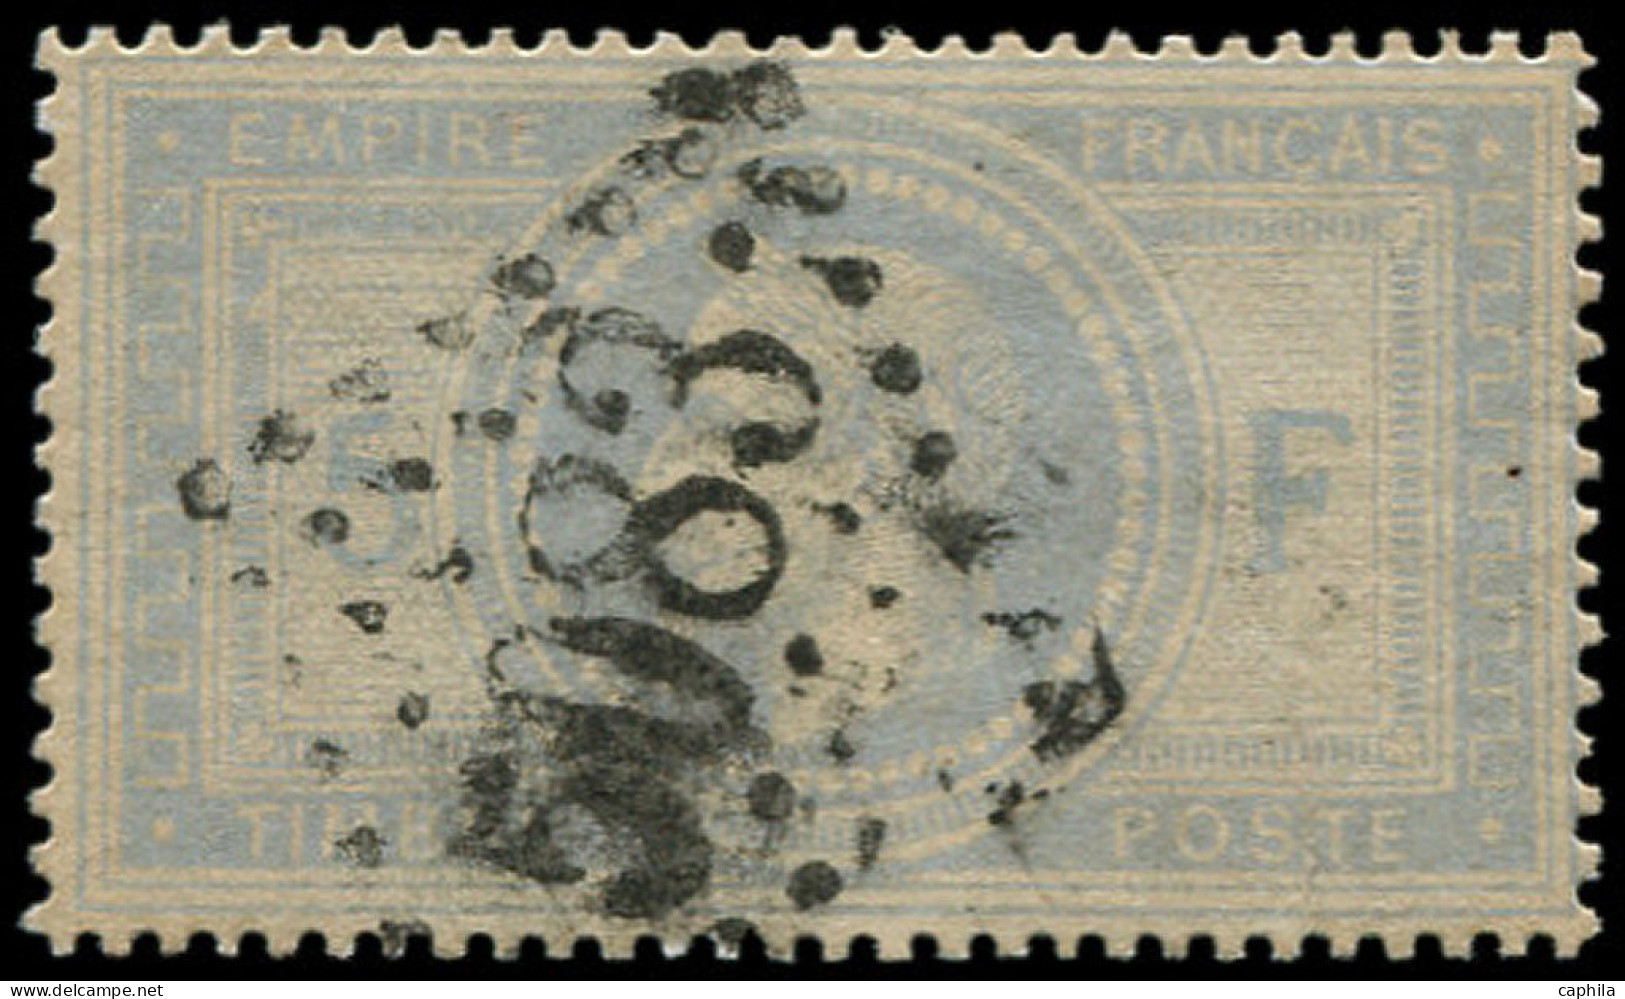 O FRANCE - Poste - 33, Gros Chiffres "5083" Constantinople: 5f. Violet-gris - 1863-1870 Napoleon III With Laurels